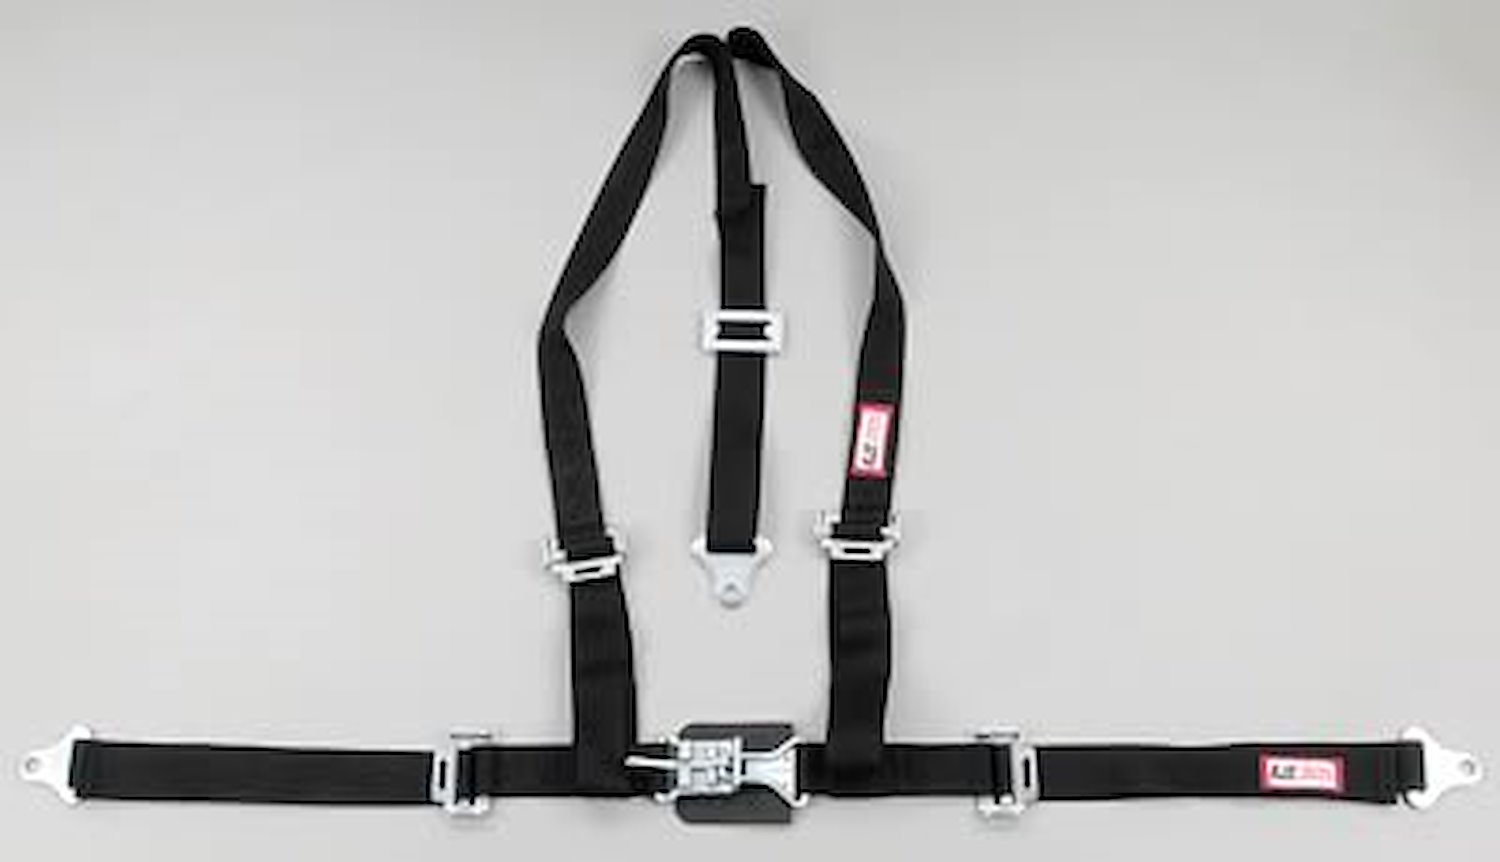 NON-SFI L&L HARNESS 3 PULL DOWN Lap Belt SNAP SEWN IN 2 S.H. Individual ROLL BAR Mount WRAP/BOLT GRAY